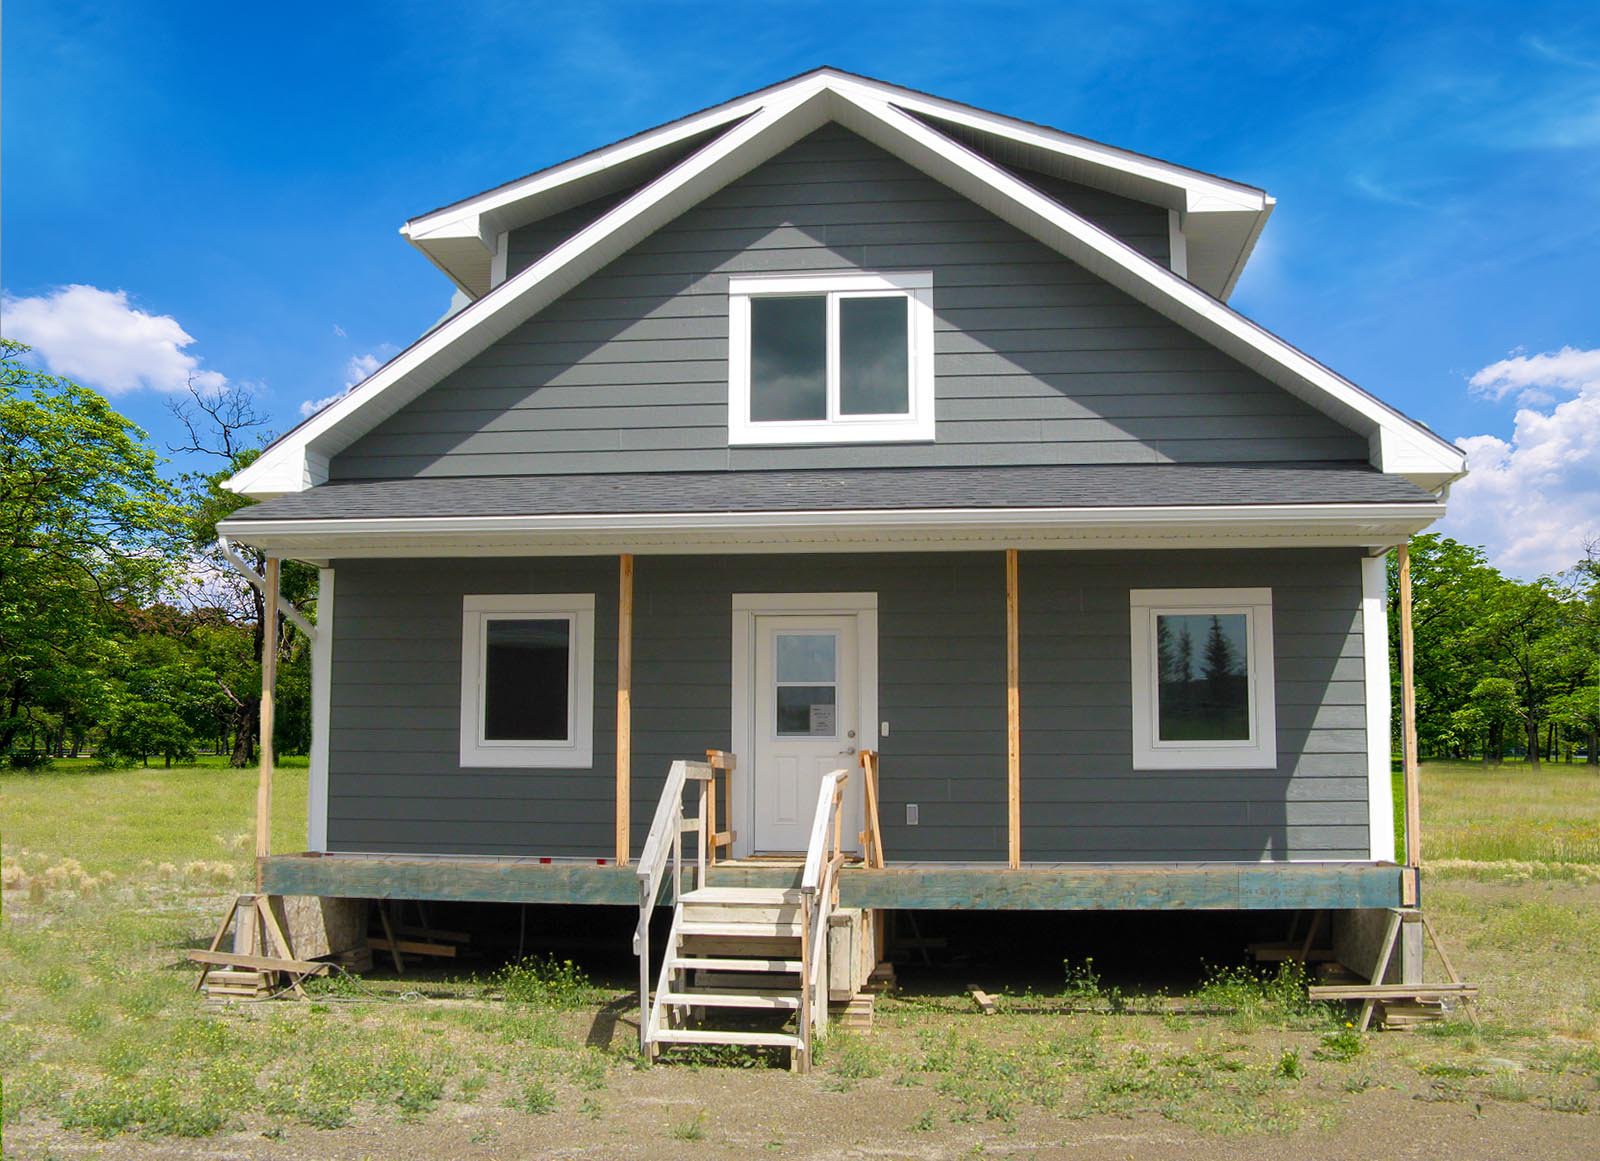 ready to move homes cottages nelson homes prebuilt modular homes.jpg